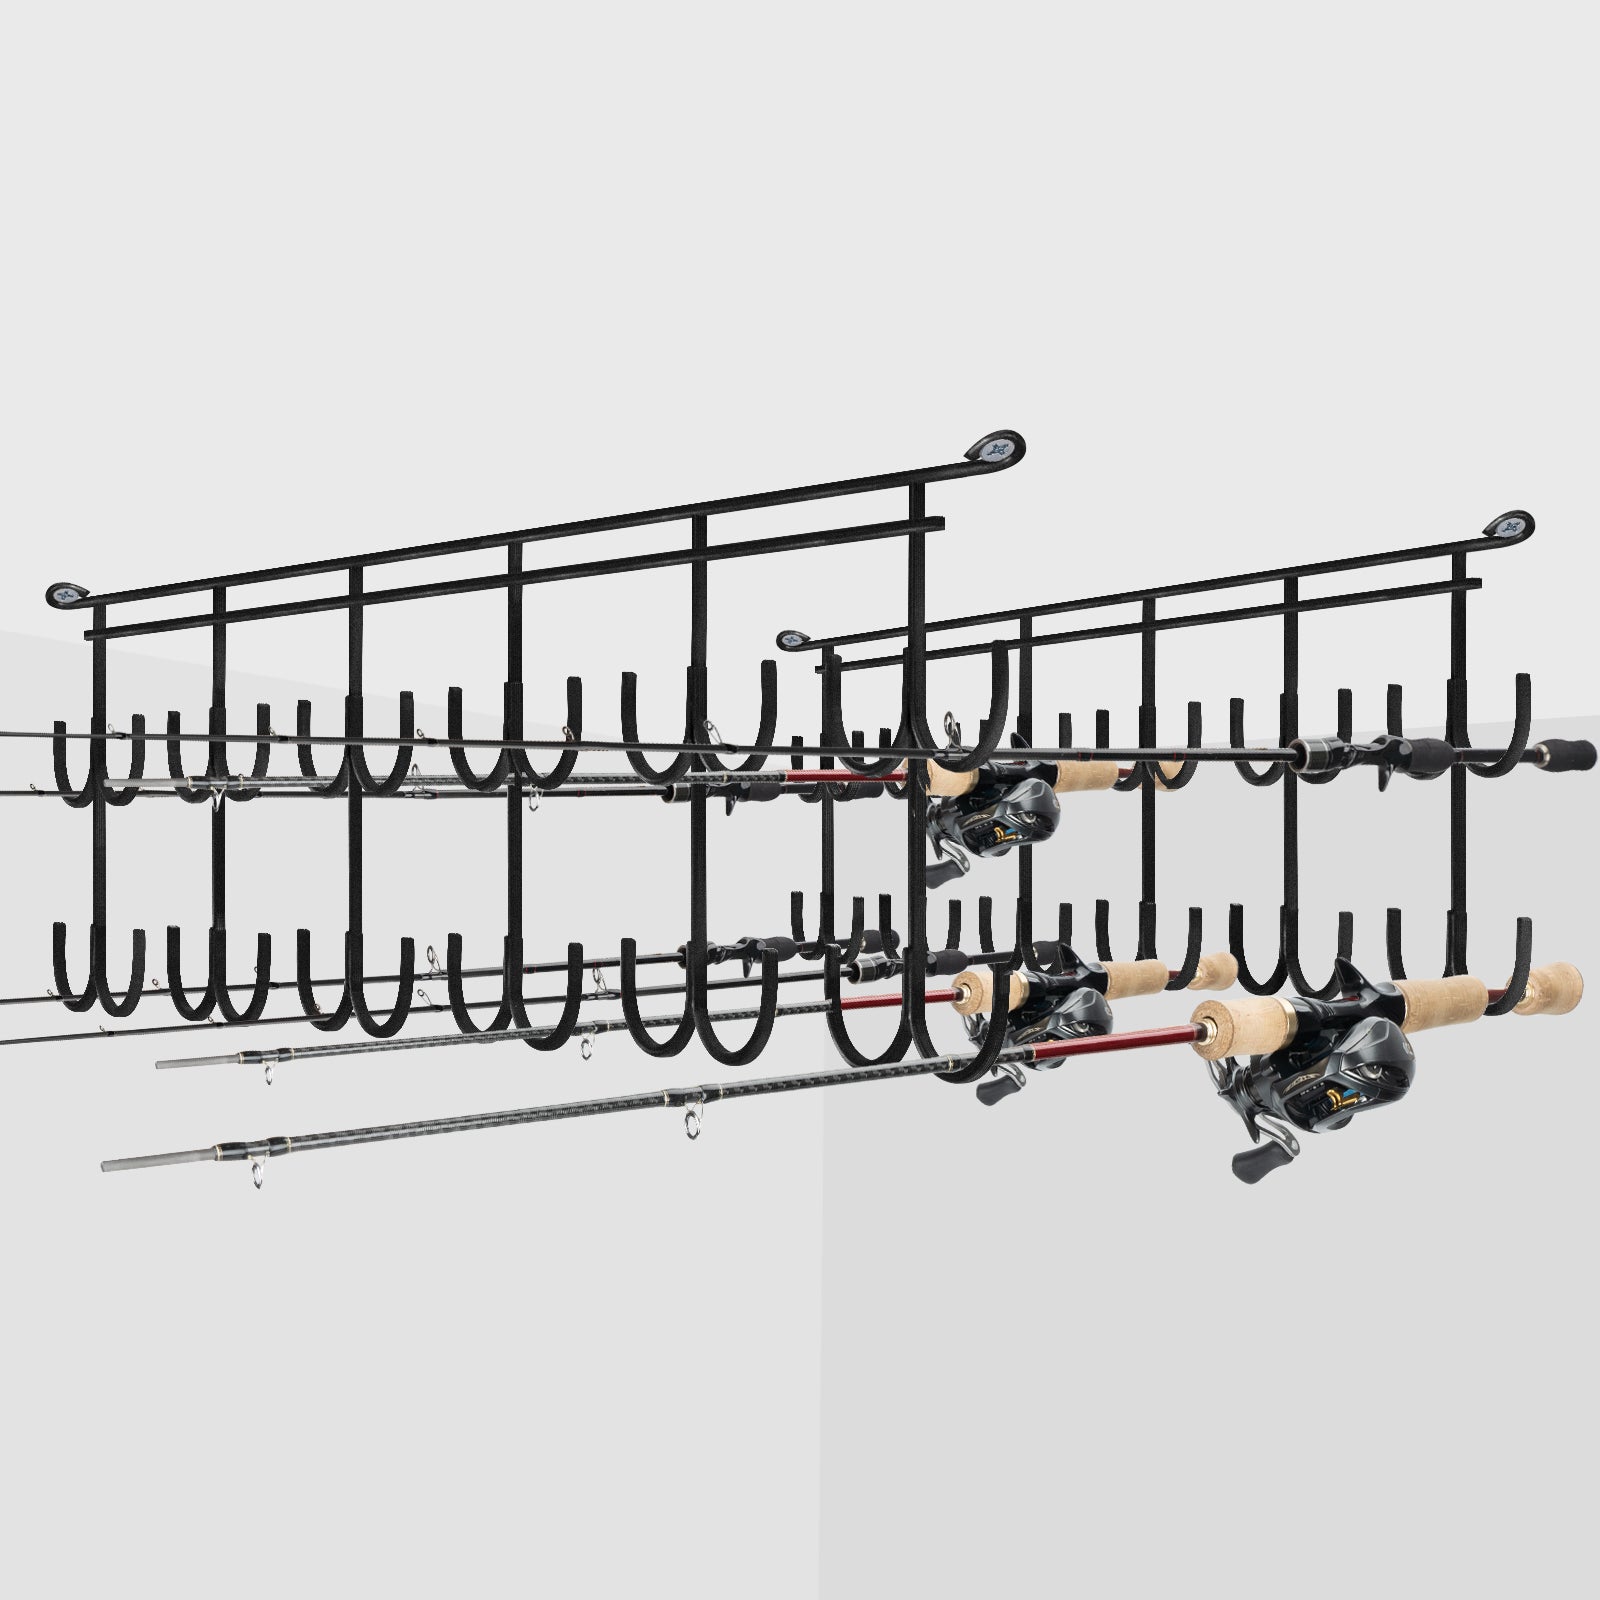 THKFISH Fishing Rod Rack for Wall Rod Holders Hold up to 24 Fishing Rod